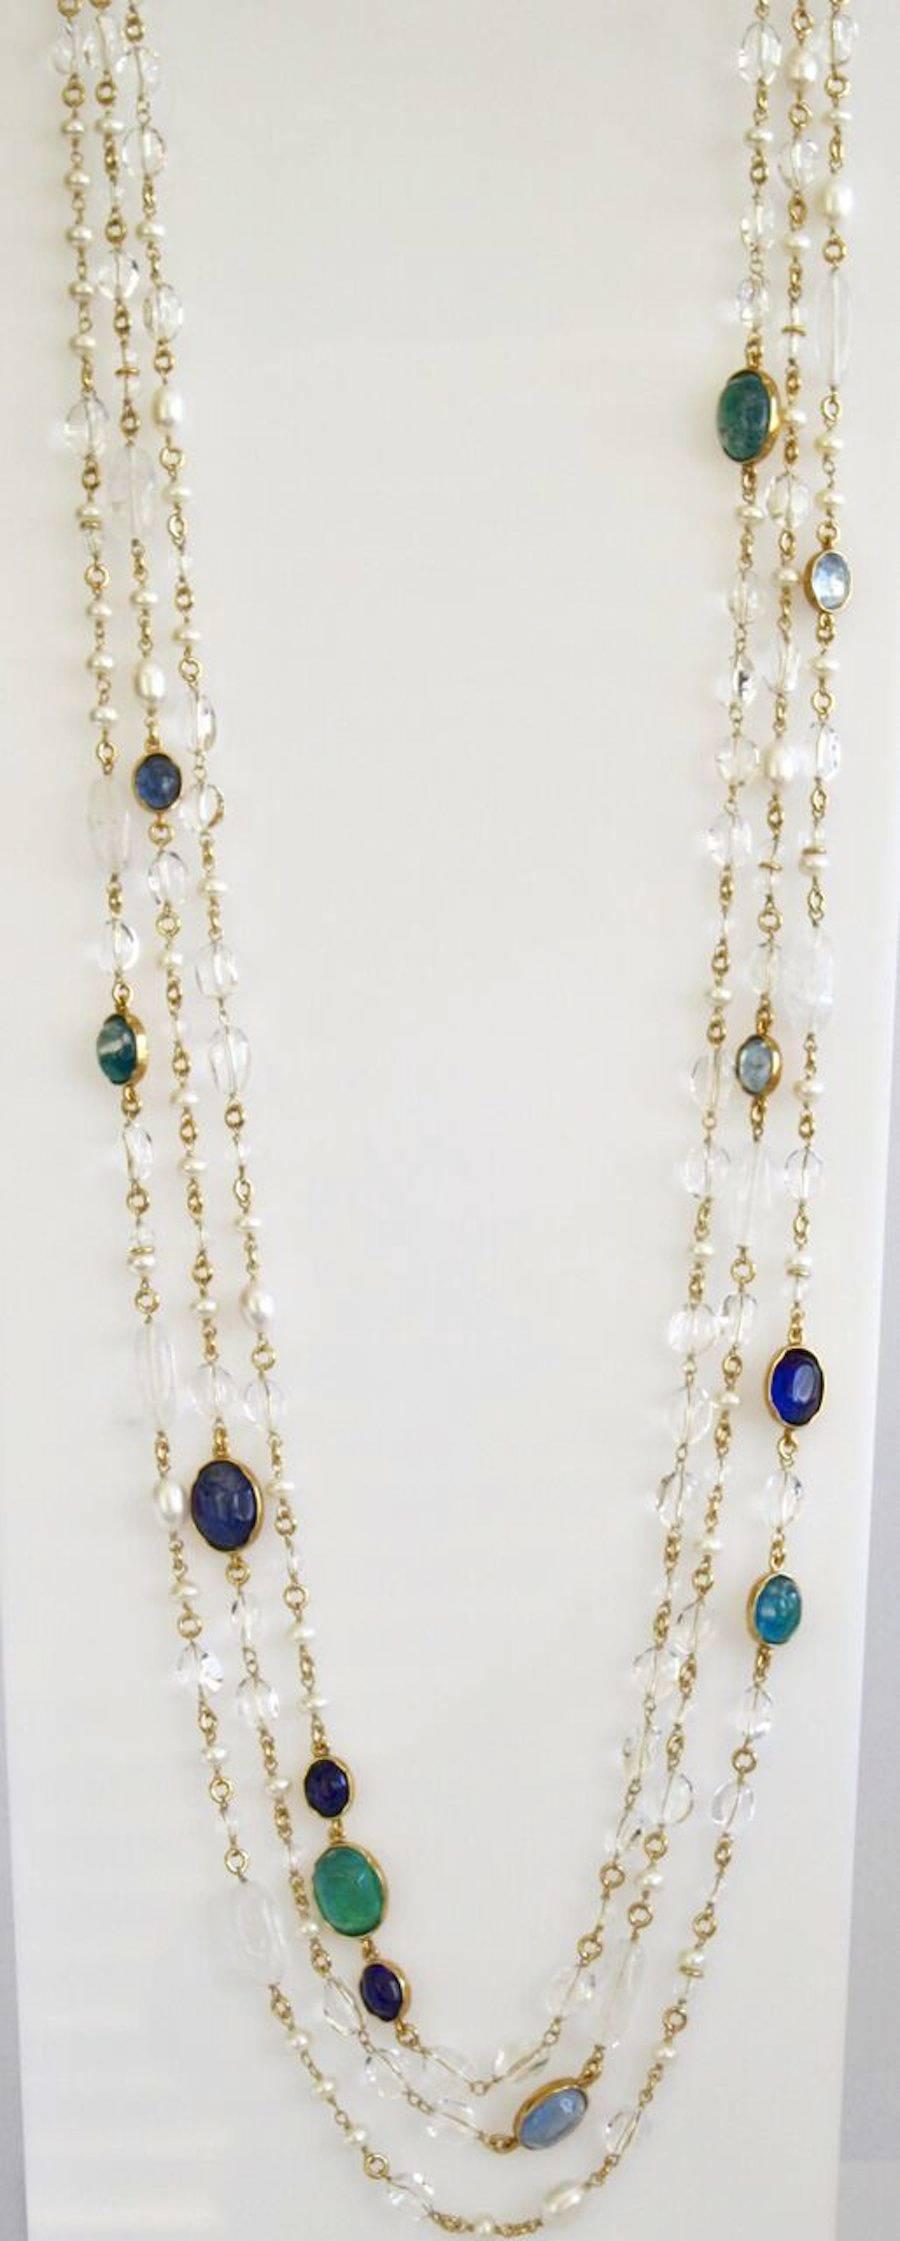 Women's Goossens Paris Pearl and Tinted Blue Rock Crystal Triple Row Long Necklace